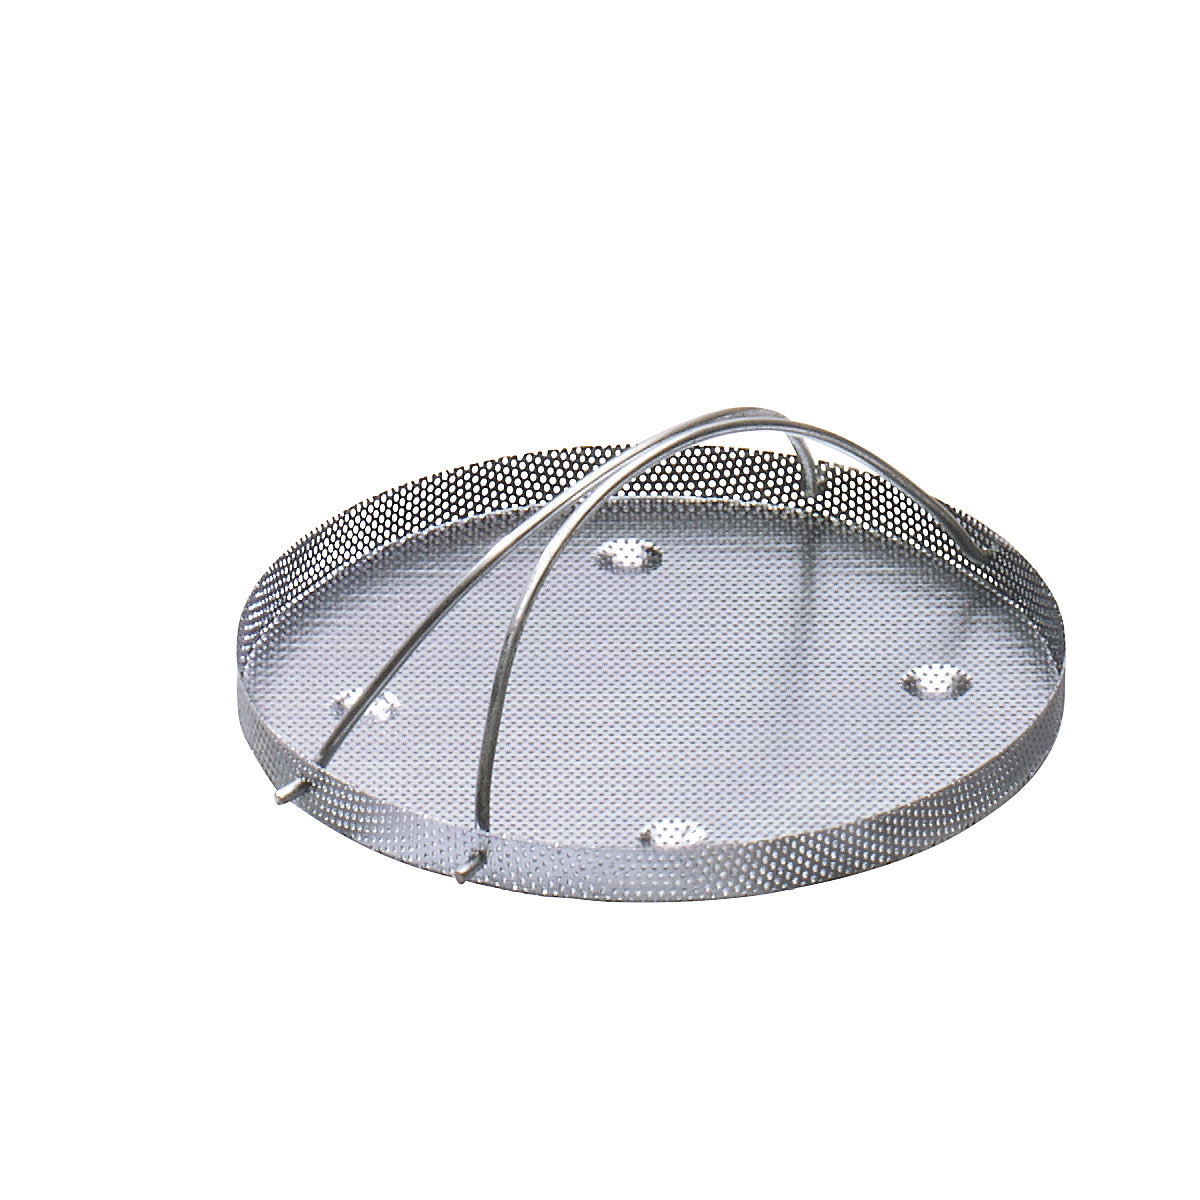 Parts basket with perforated base - Justrite